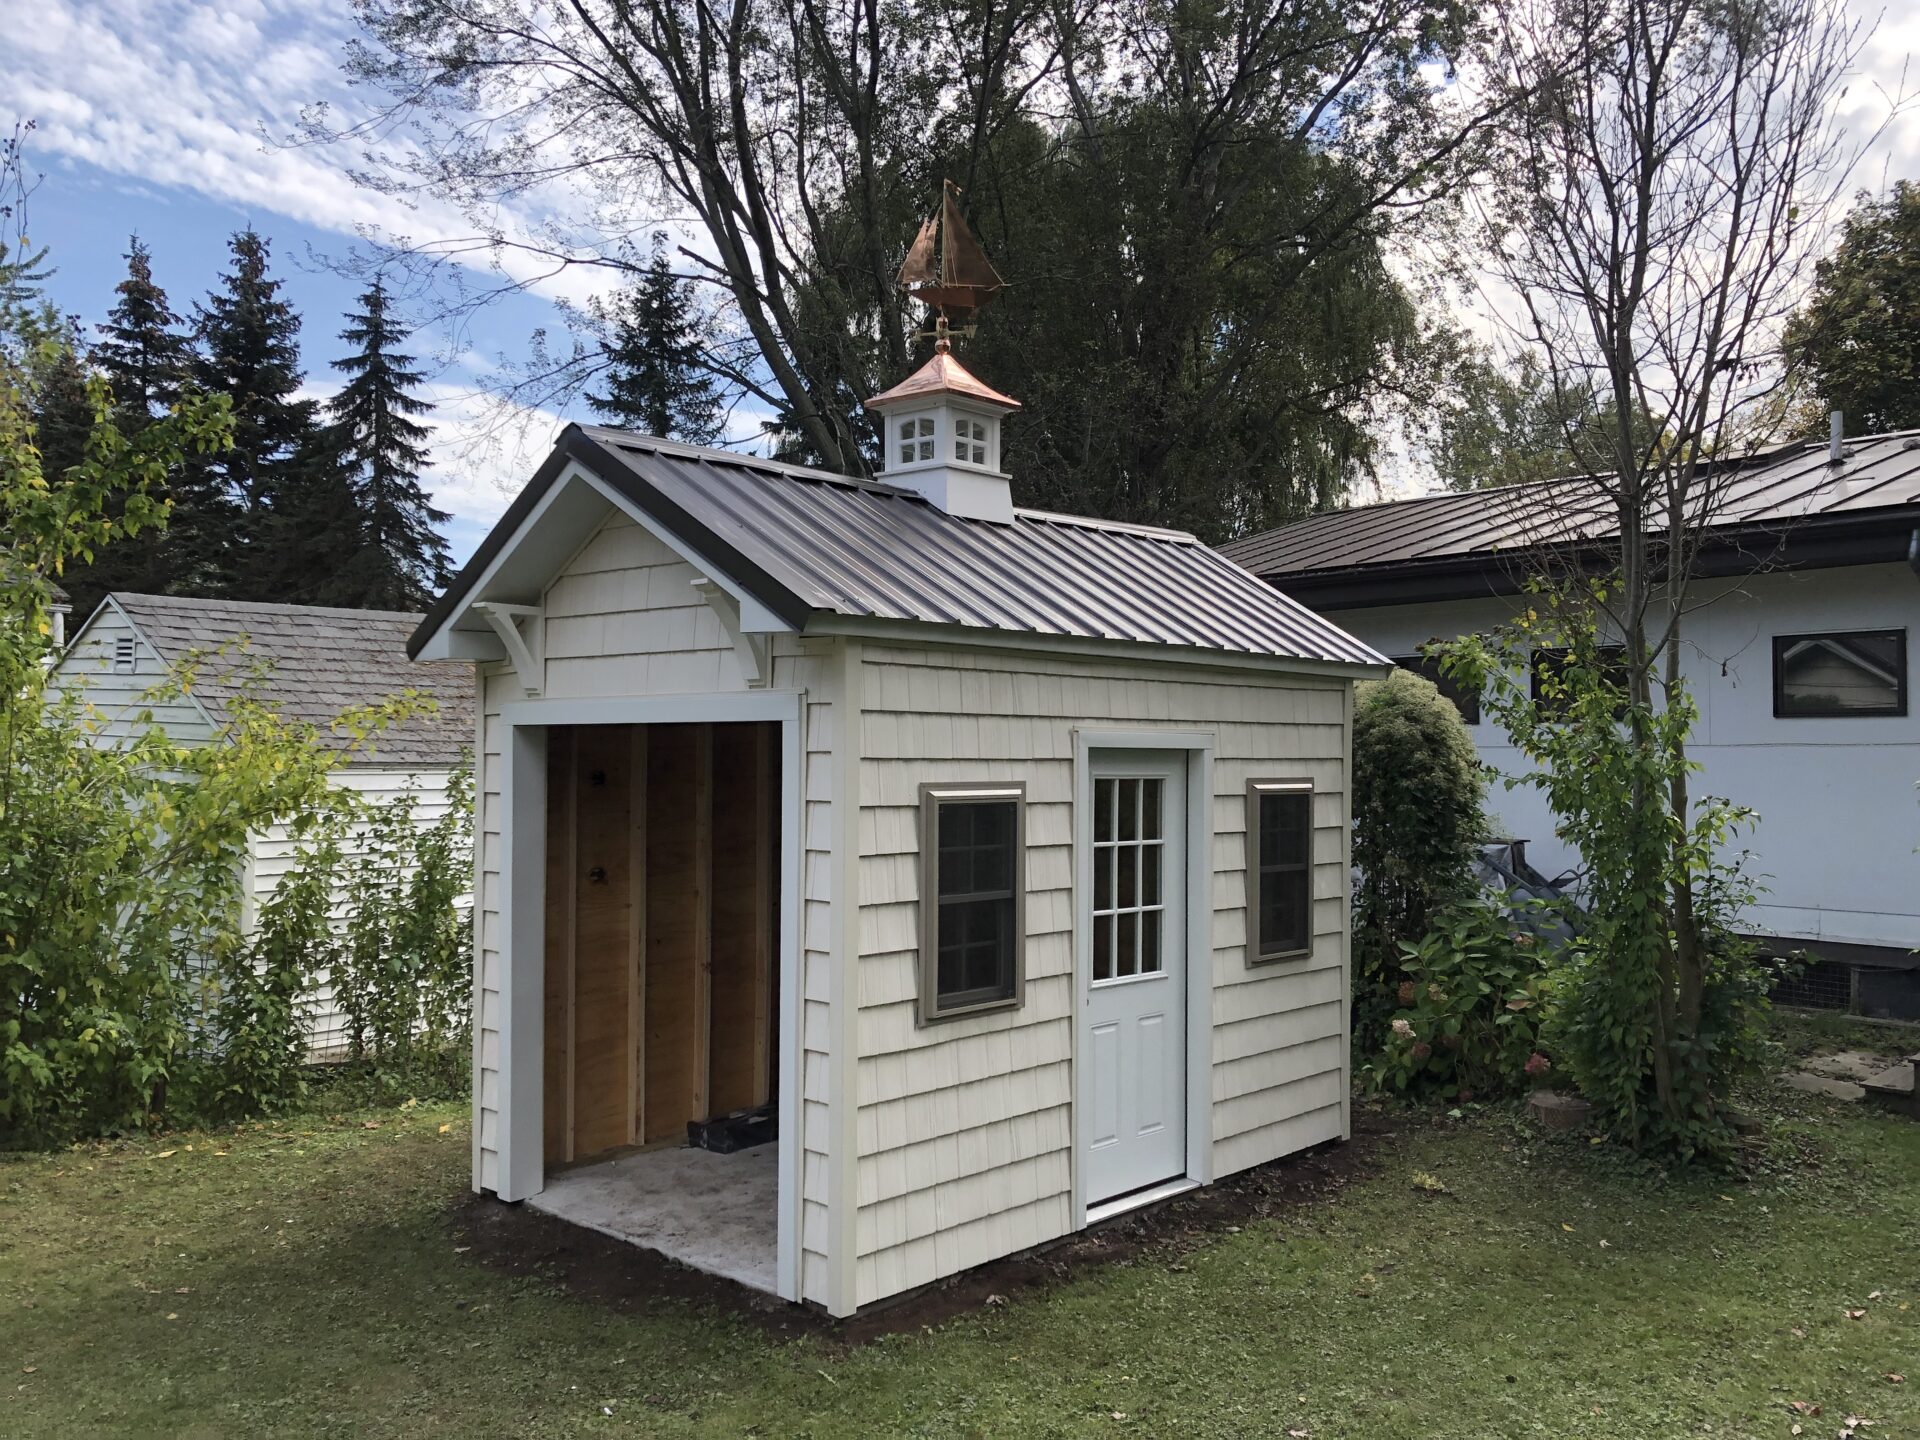 A small white shed with a metal roof.